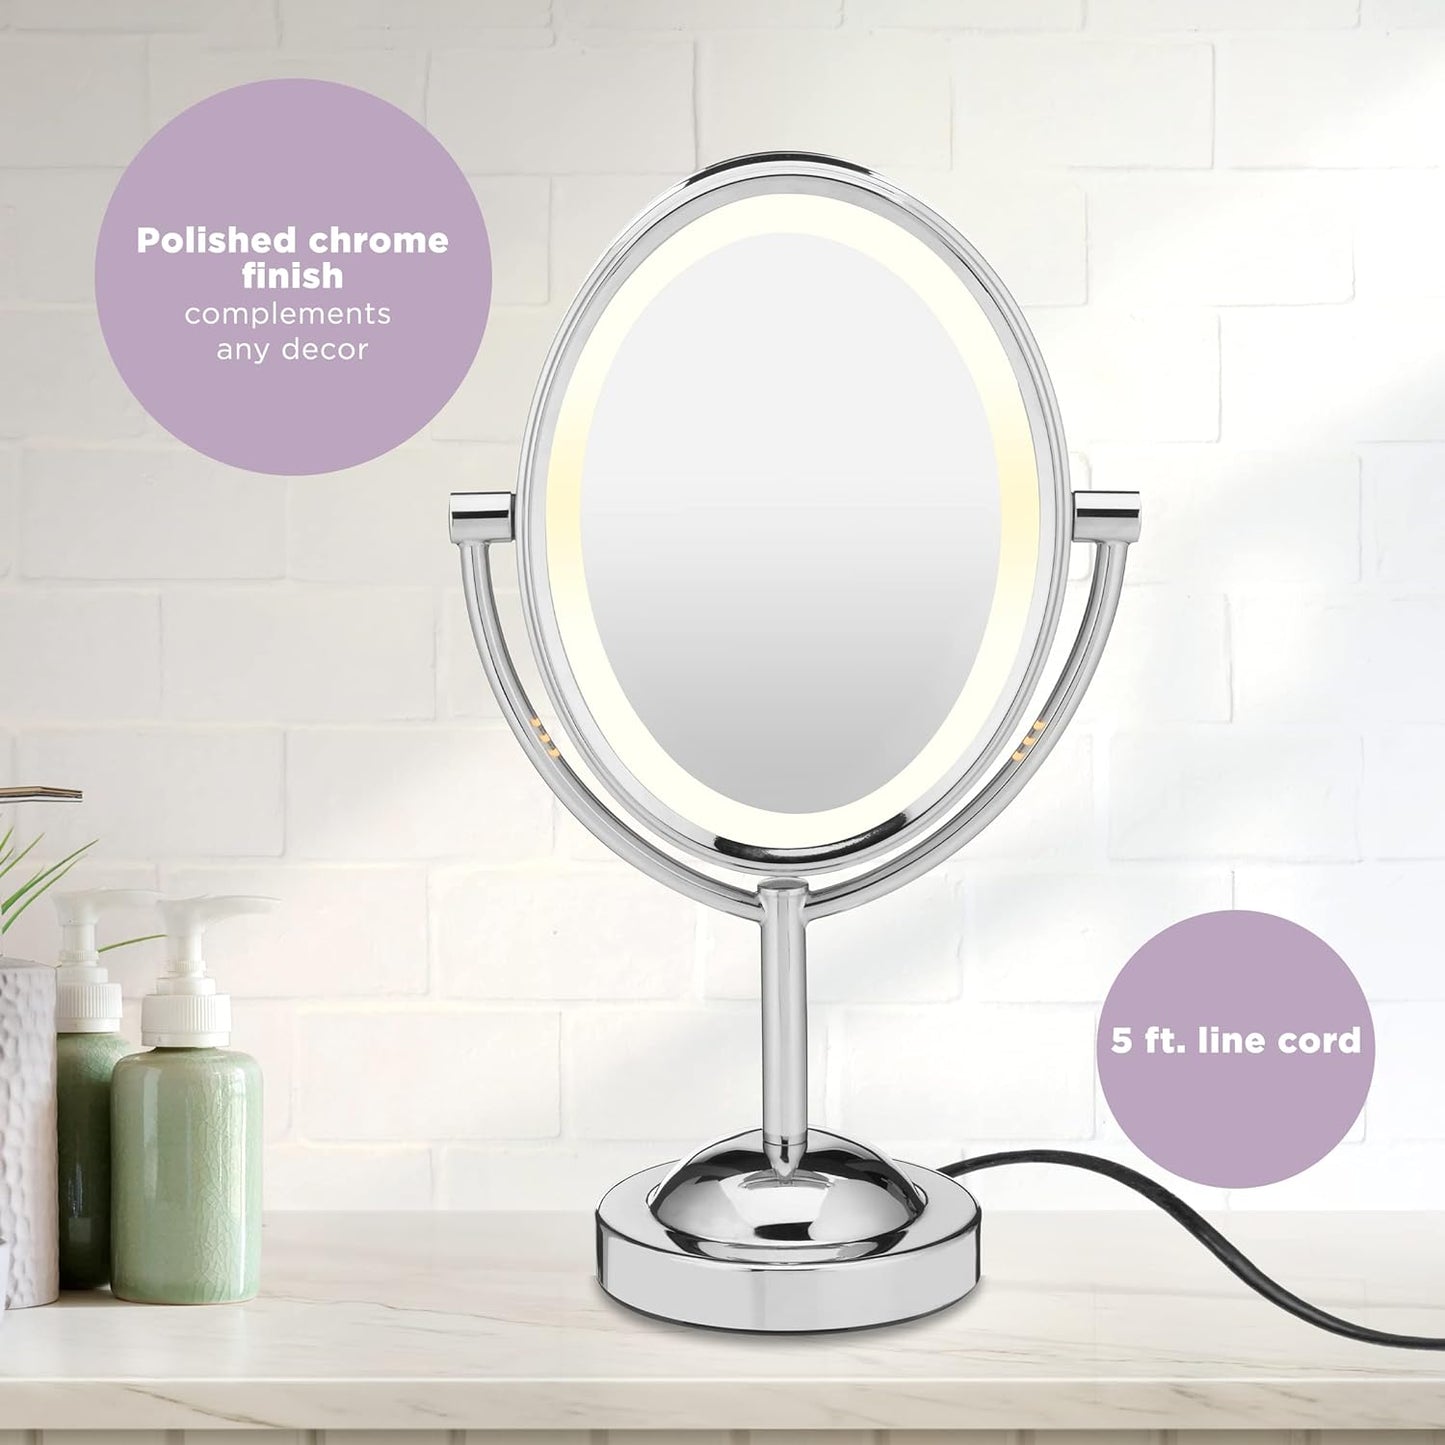 Lighted Makeup Mirror with Magnification, Oval Mirror, LED Vanity Mirror, 1X/7X Magnifying Mirror, Double Sided Mirror, Corded in Polished Chrome